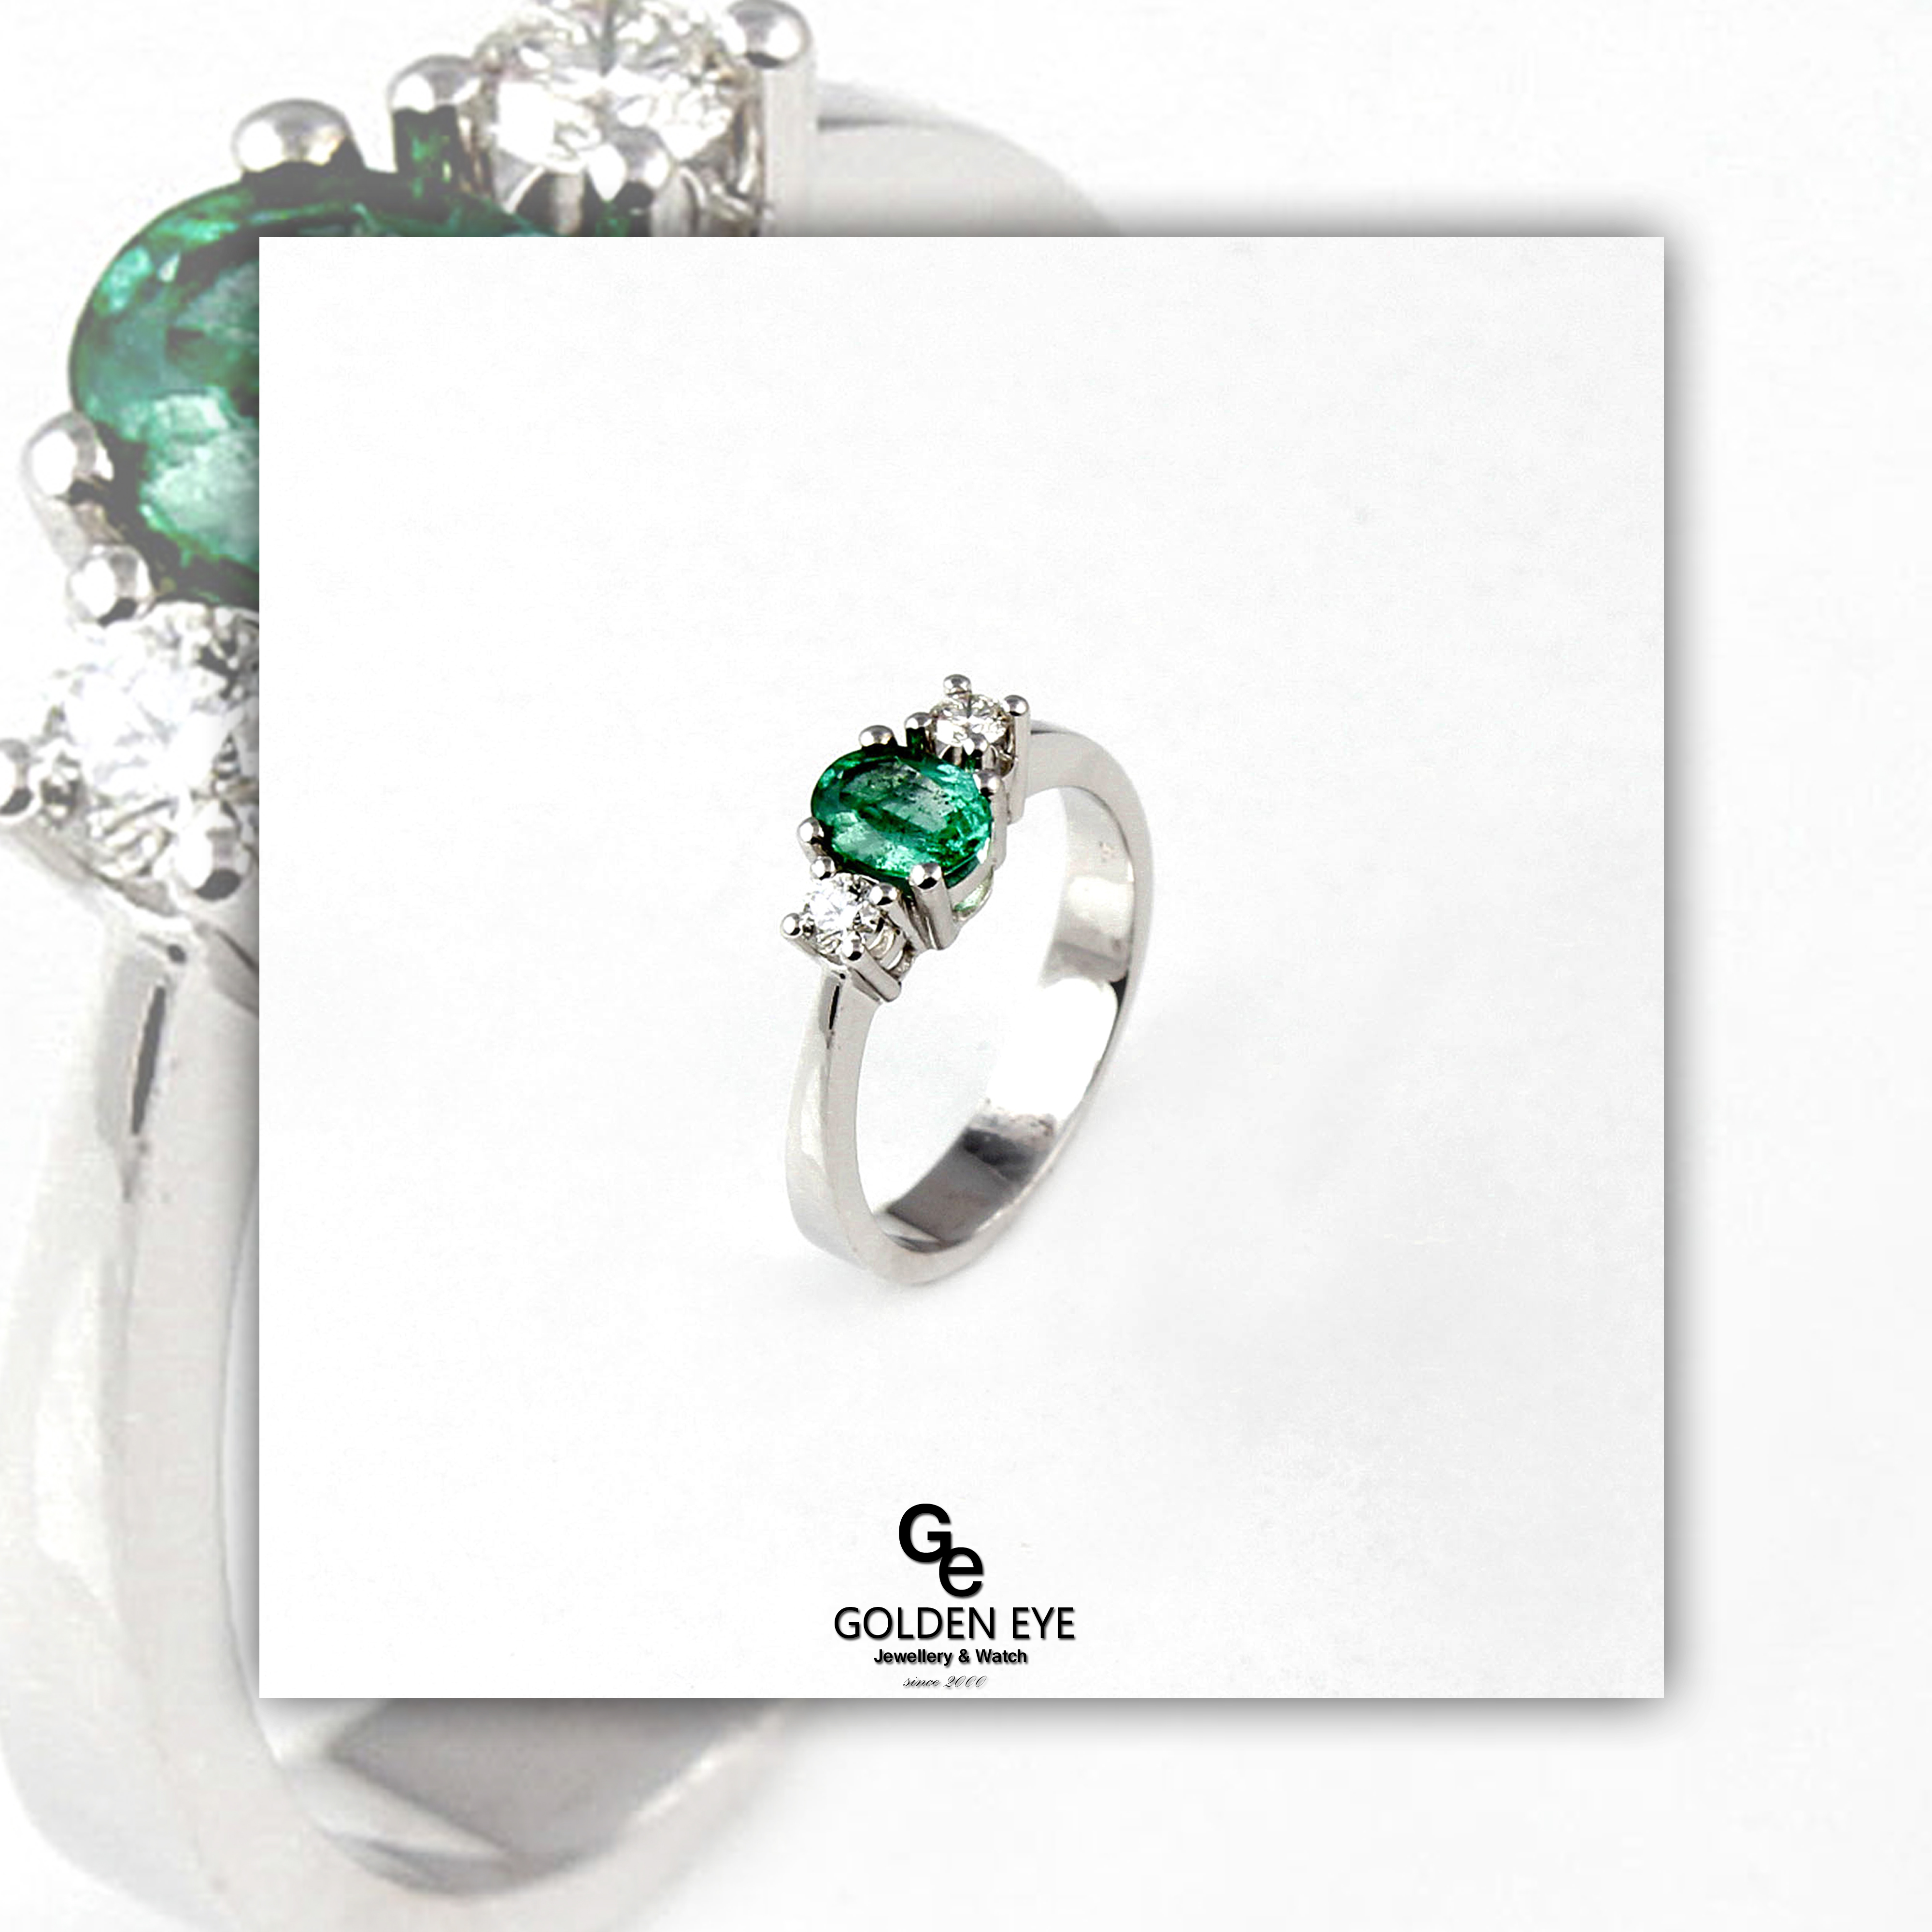 R034B White Gold Ring with Emerald and Diamonds